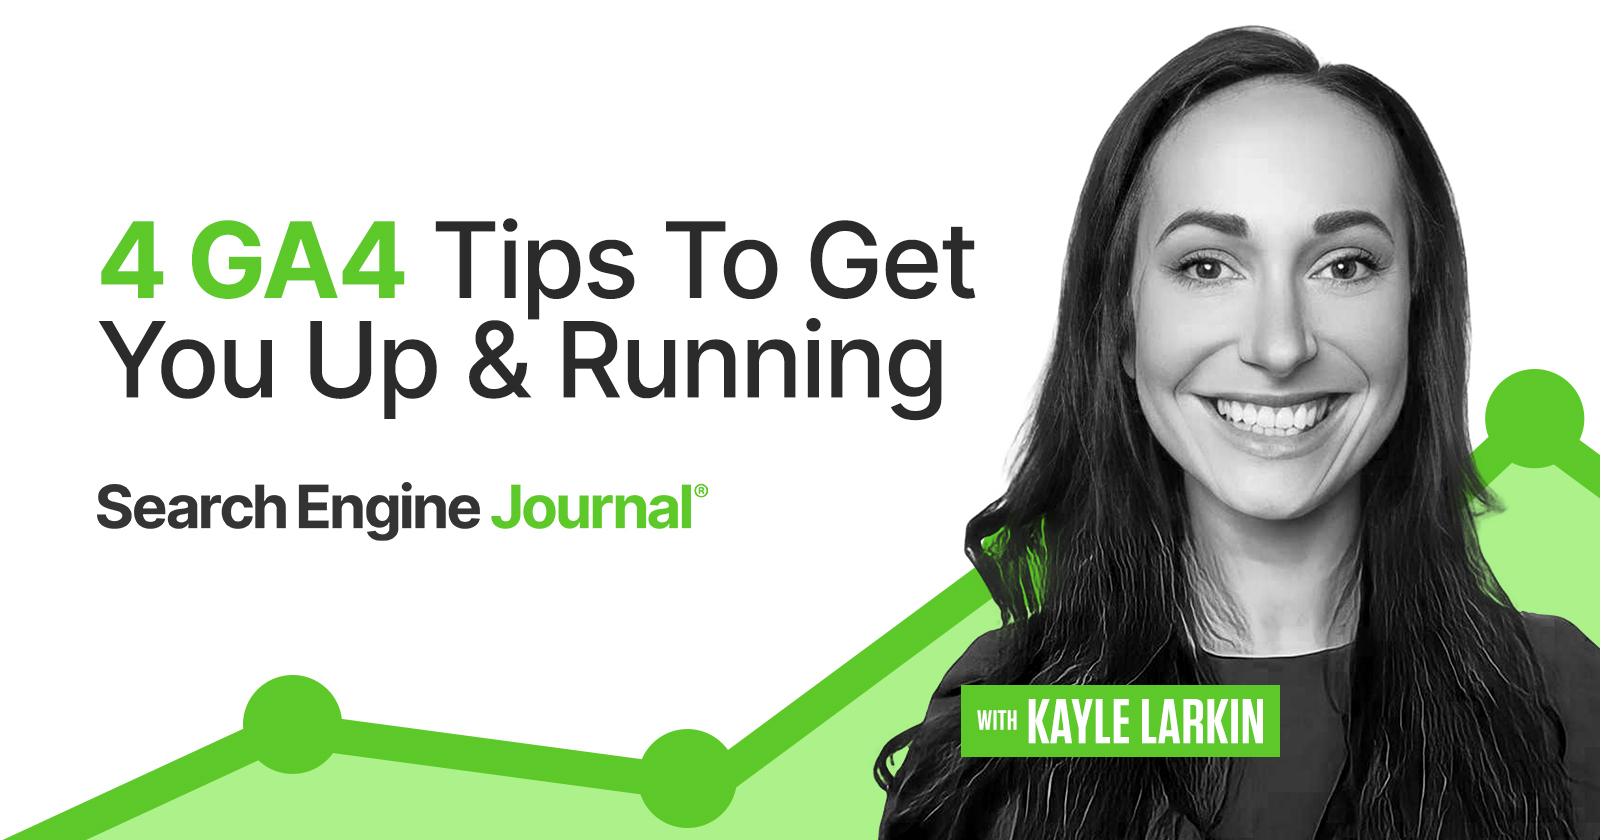 These 4 Tips Will Get You Up & Running